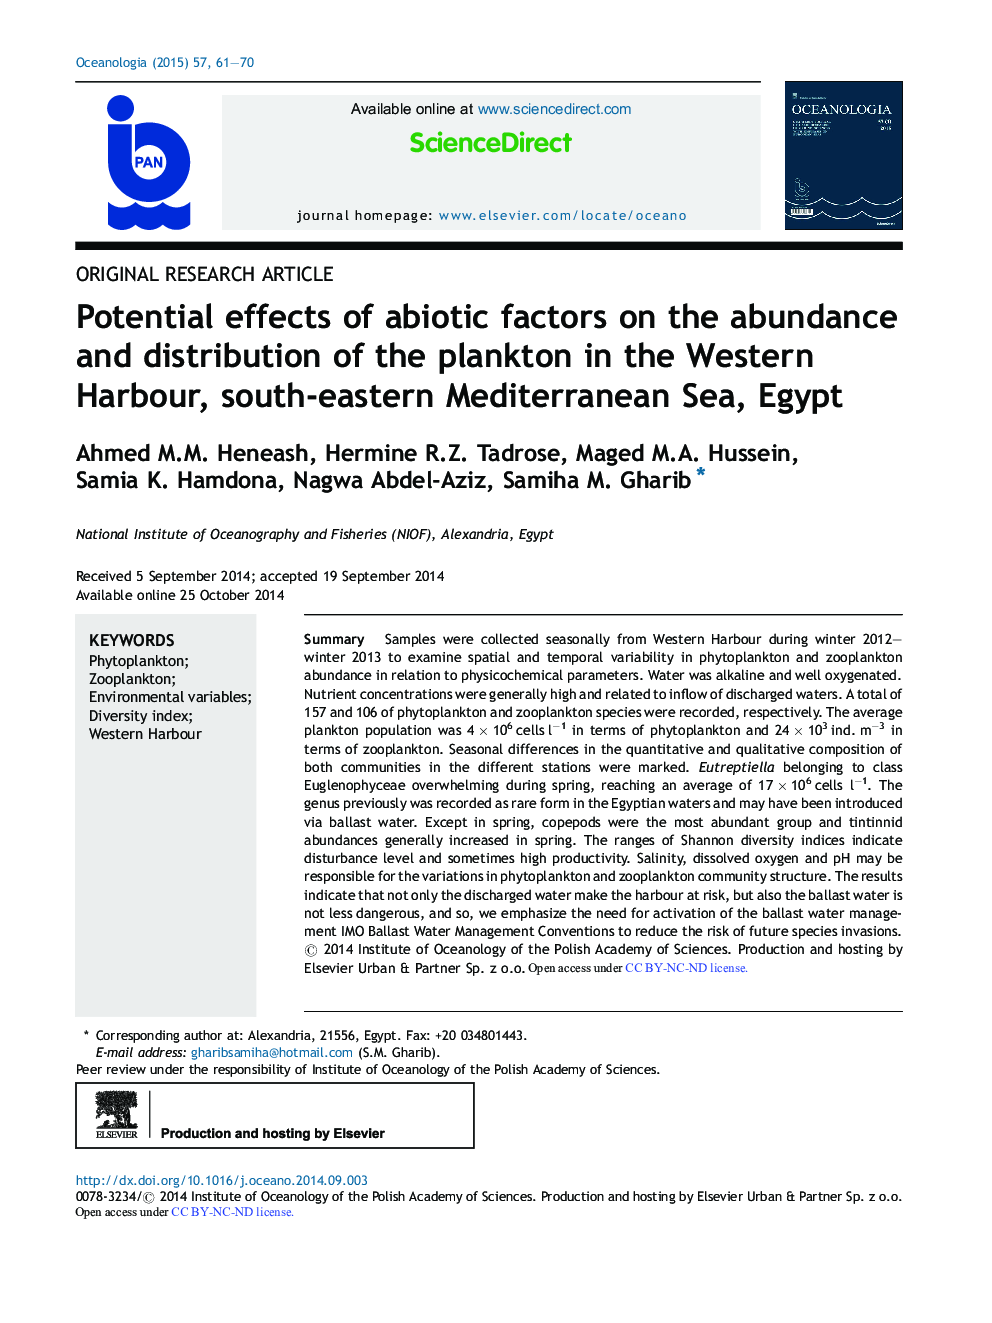 Potential effects of abiotic factors on the abundance and distribution of the plankton in the Western Harbour, south-eastern Mediterranean Sea, Egypt 